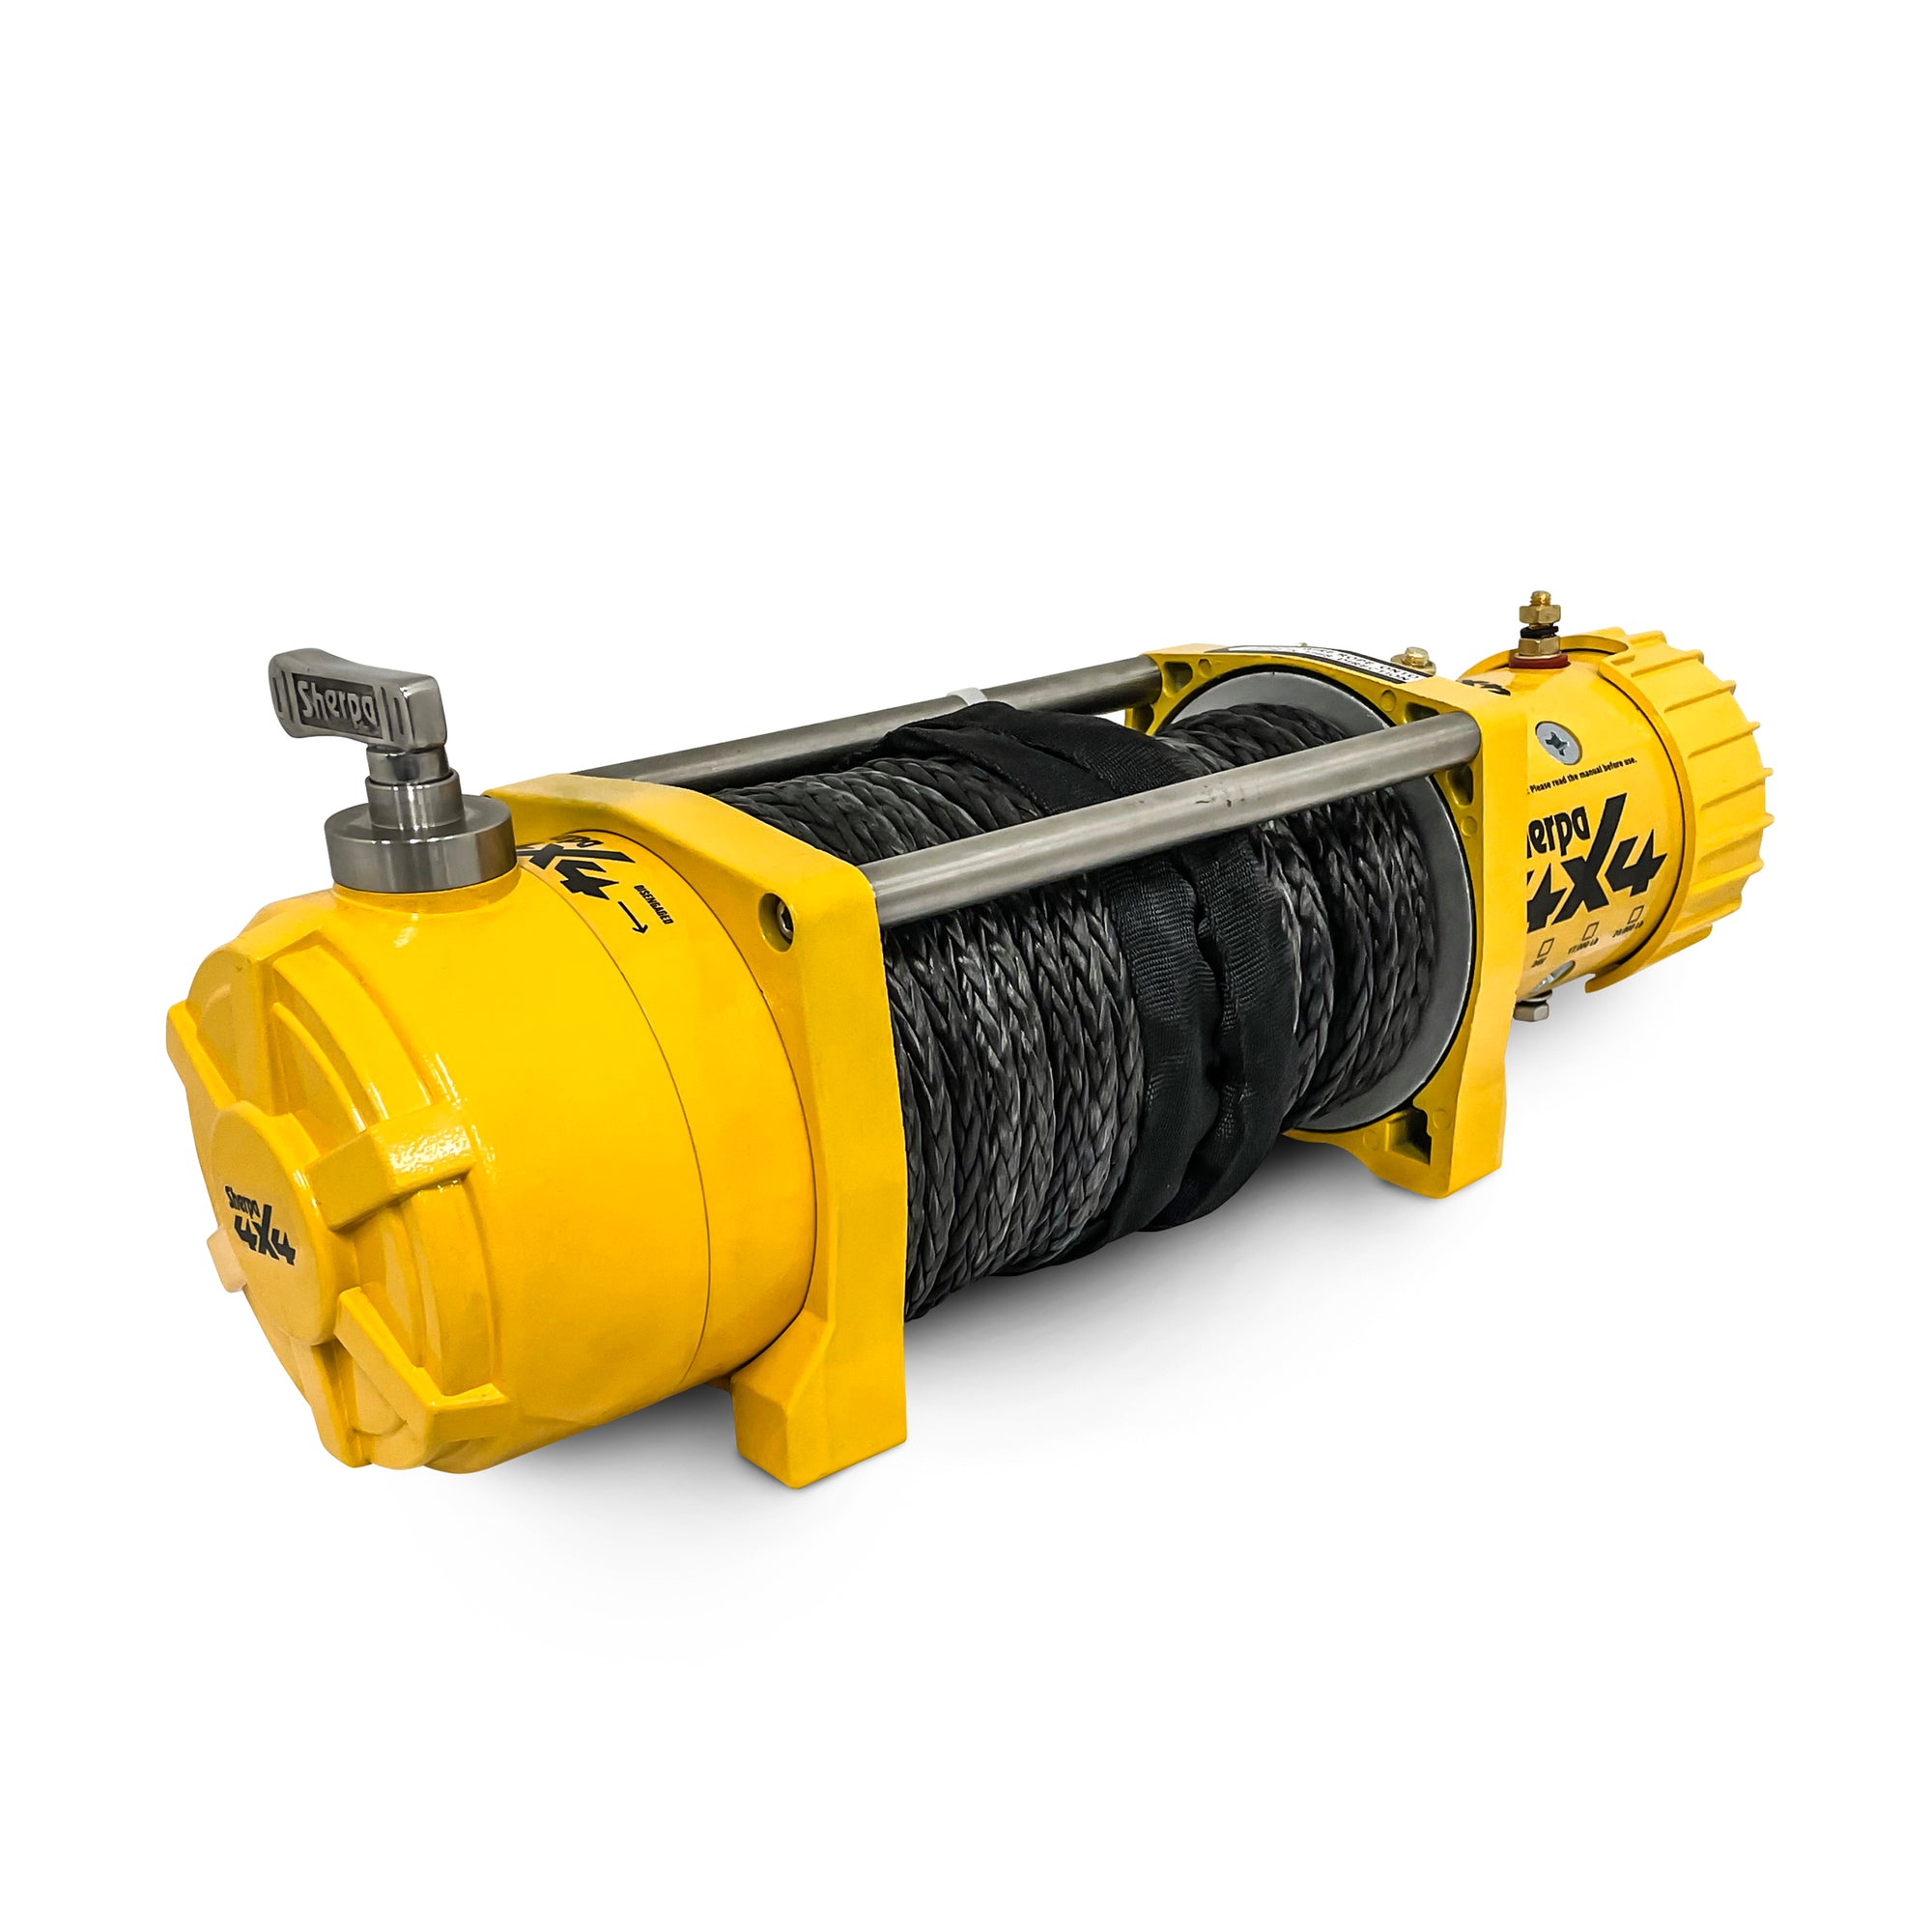 Sherpa 4x4 Colt 12,000lb winch, 28m synthetic rope